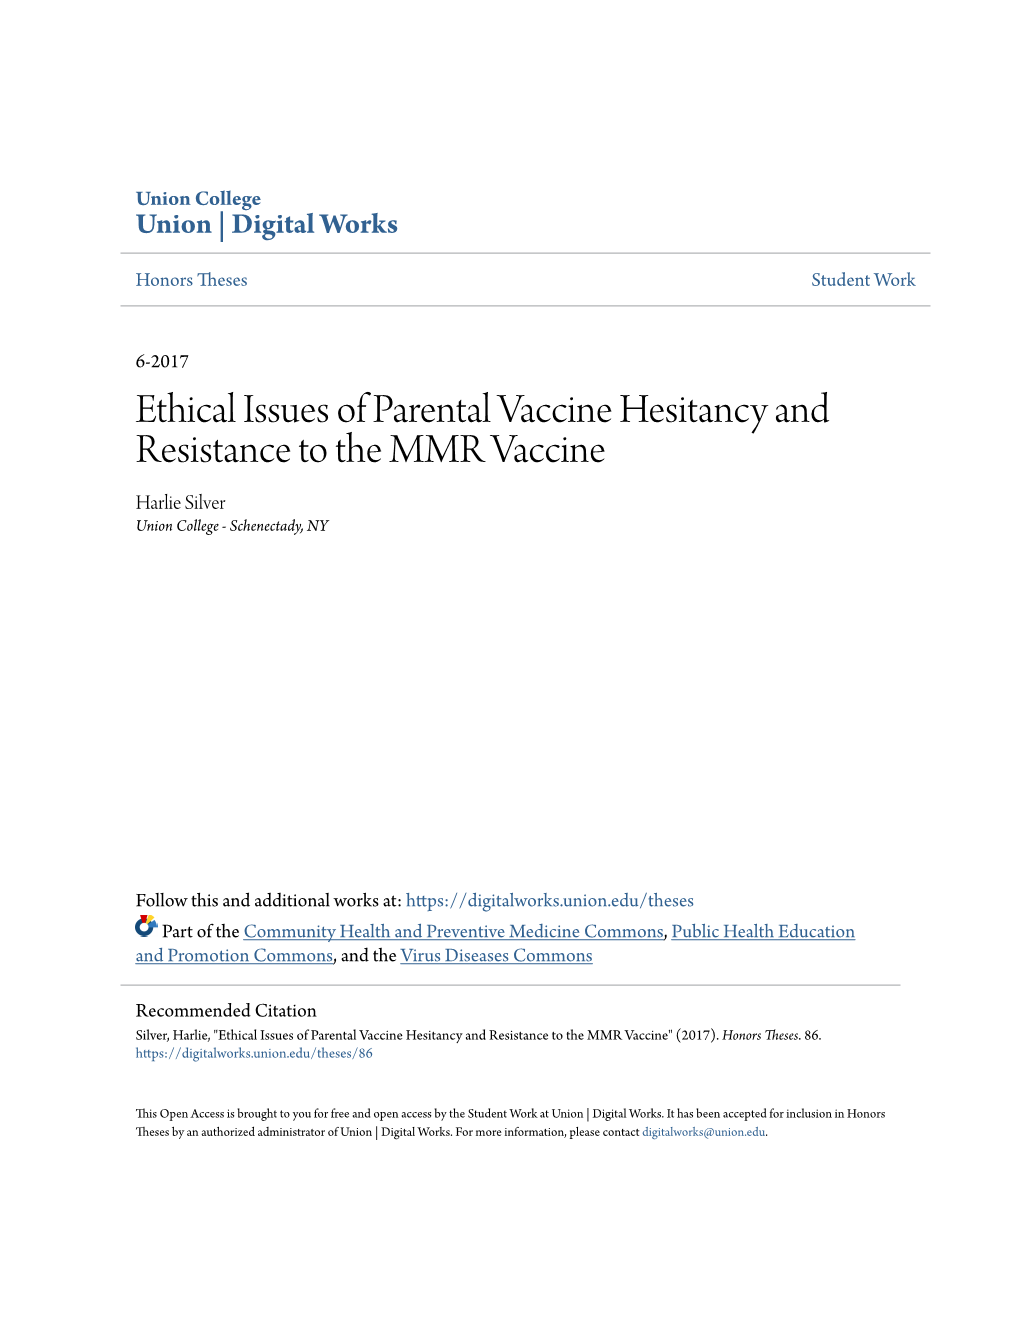 Ethical Issues of Parental Vaccine Hesitancy and Resistance to the MMR Vaccine Harlie Silver Union College - Schenectady, NY